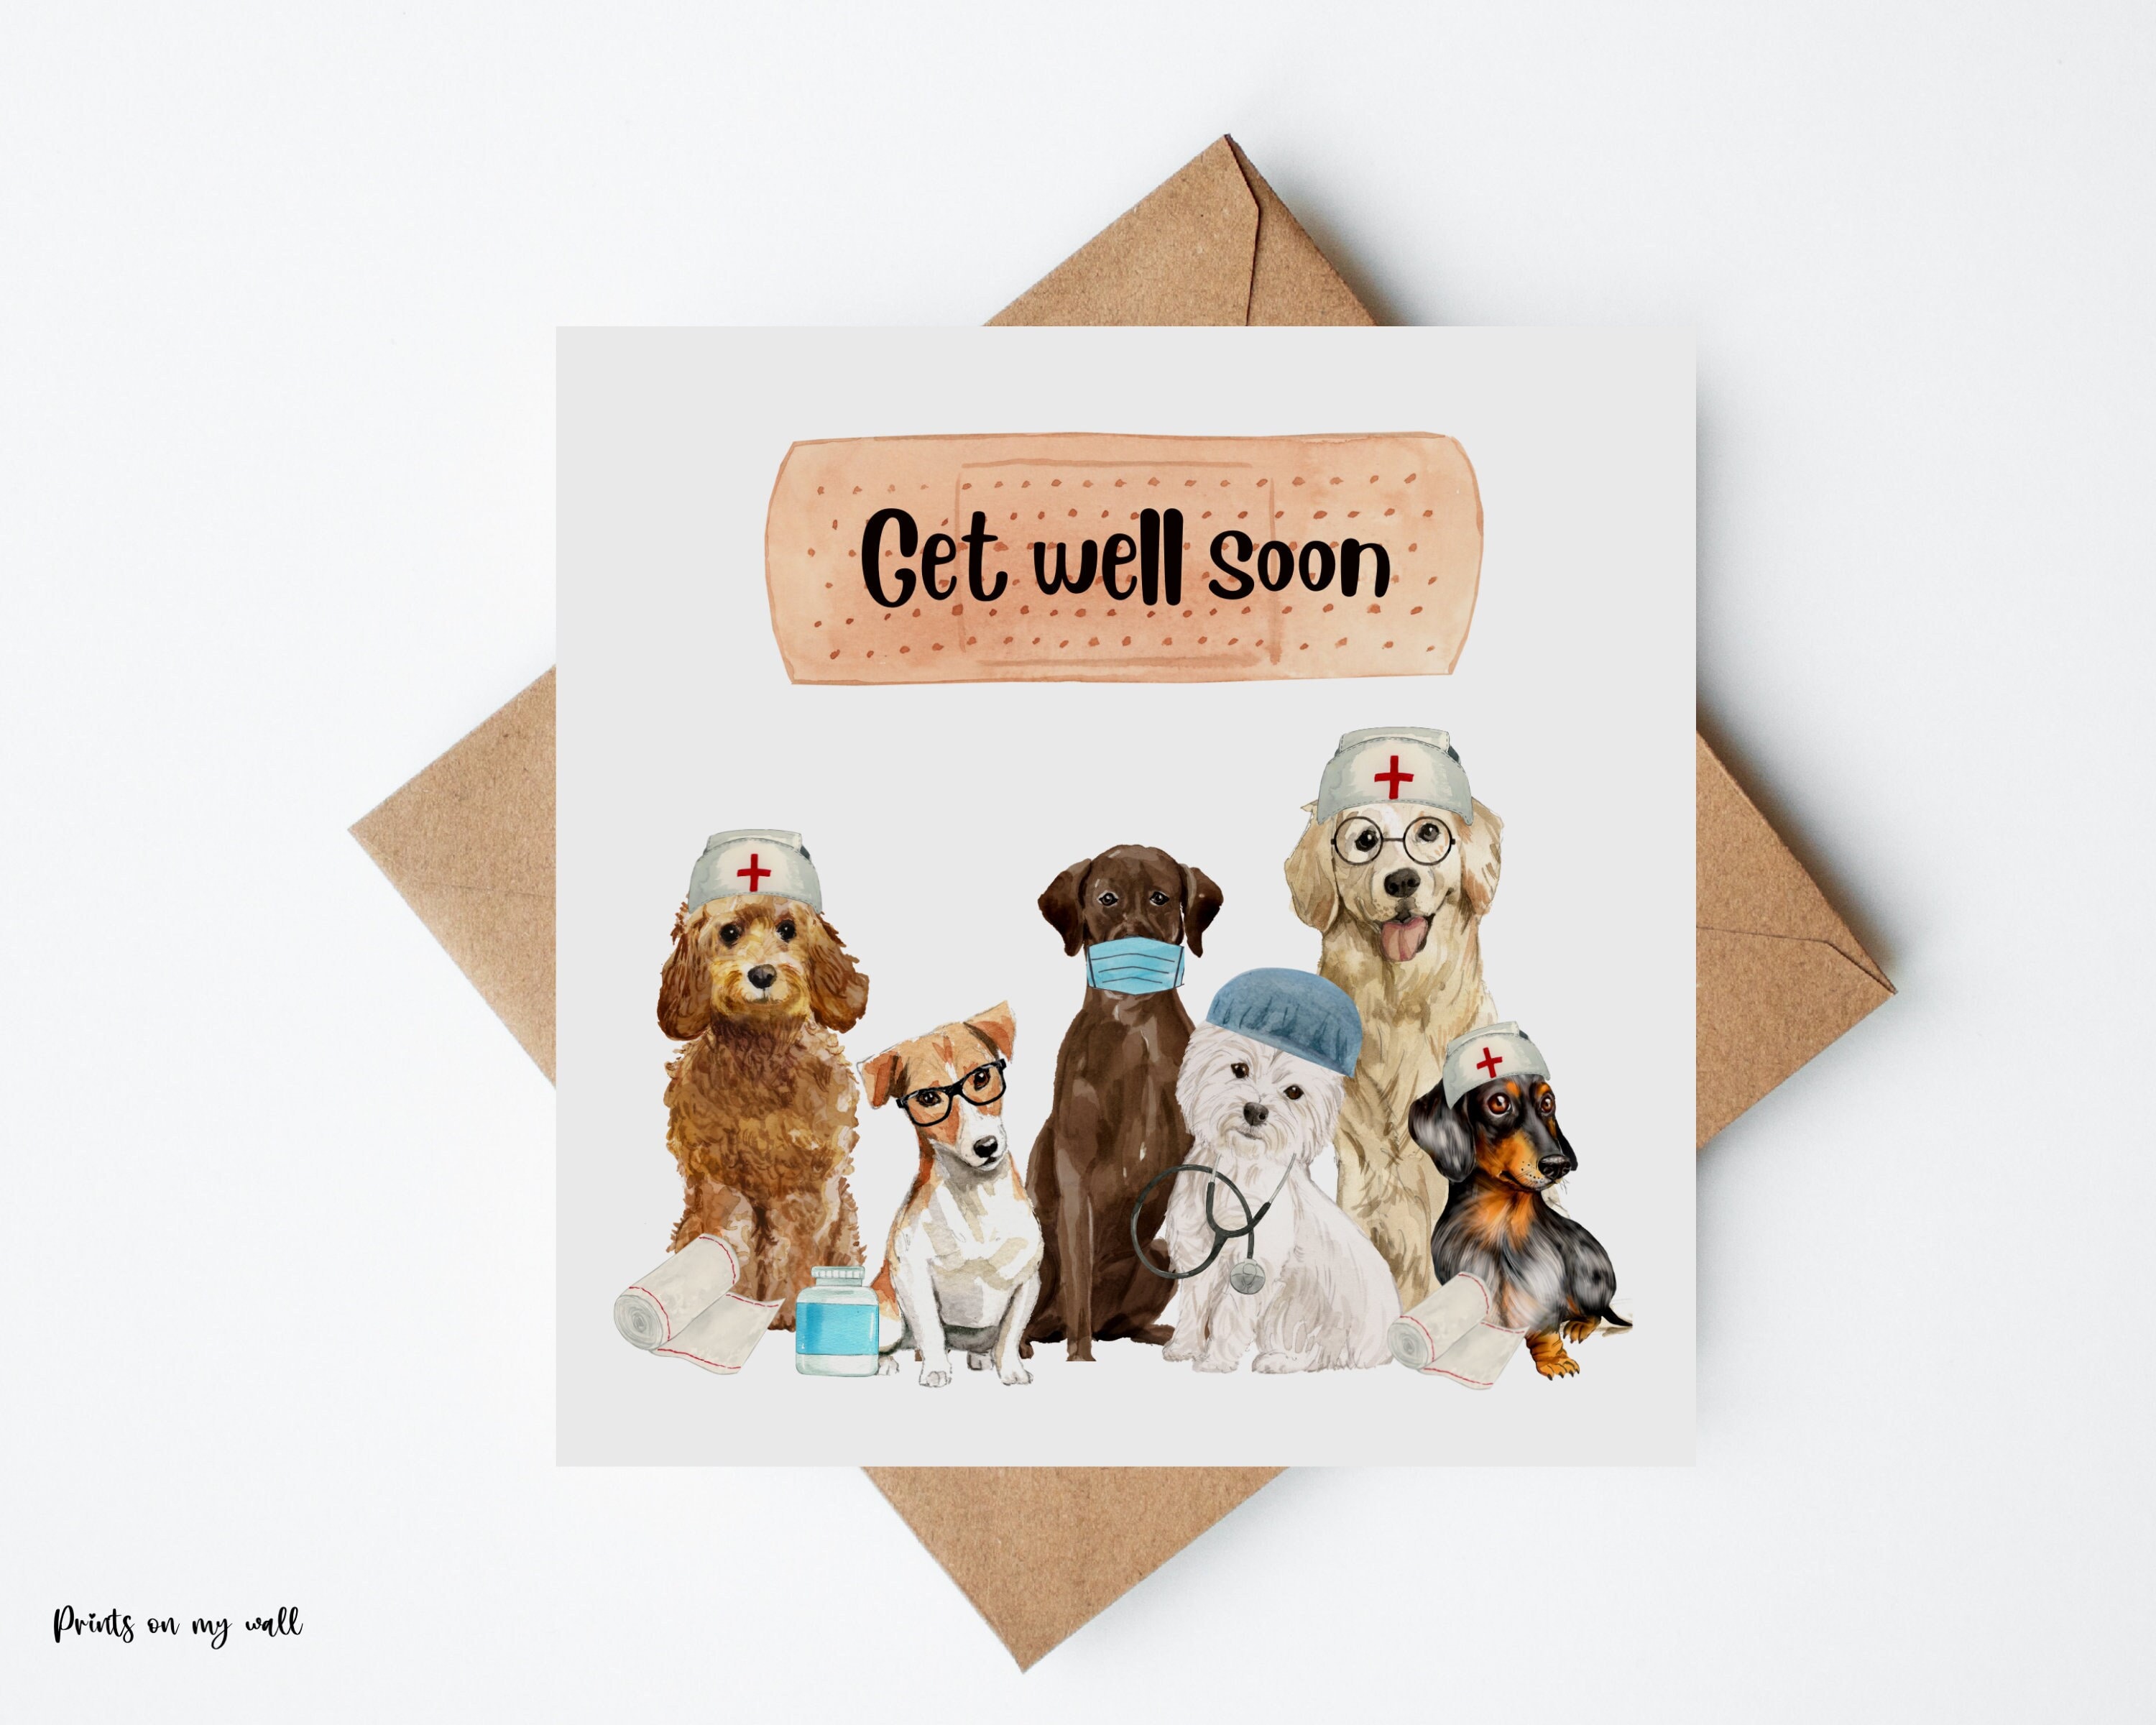 Hope you get well soon, little teddybear, Get well soon Cards & Quotes  ❤️🐻🤒